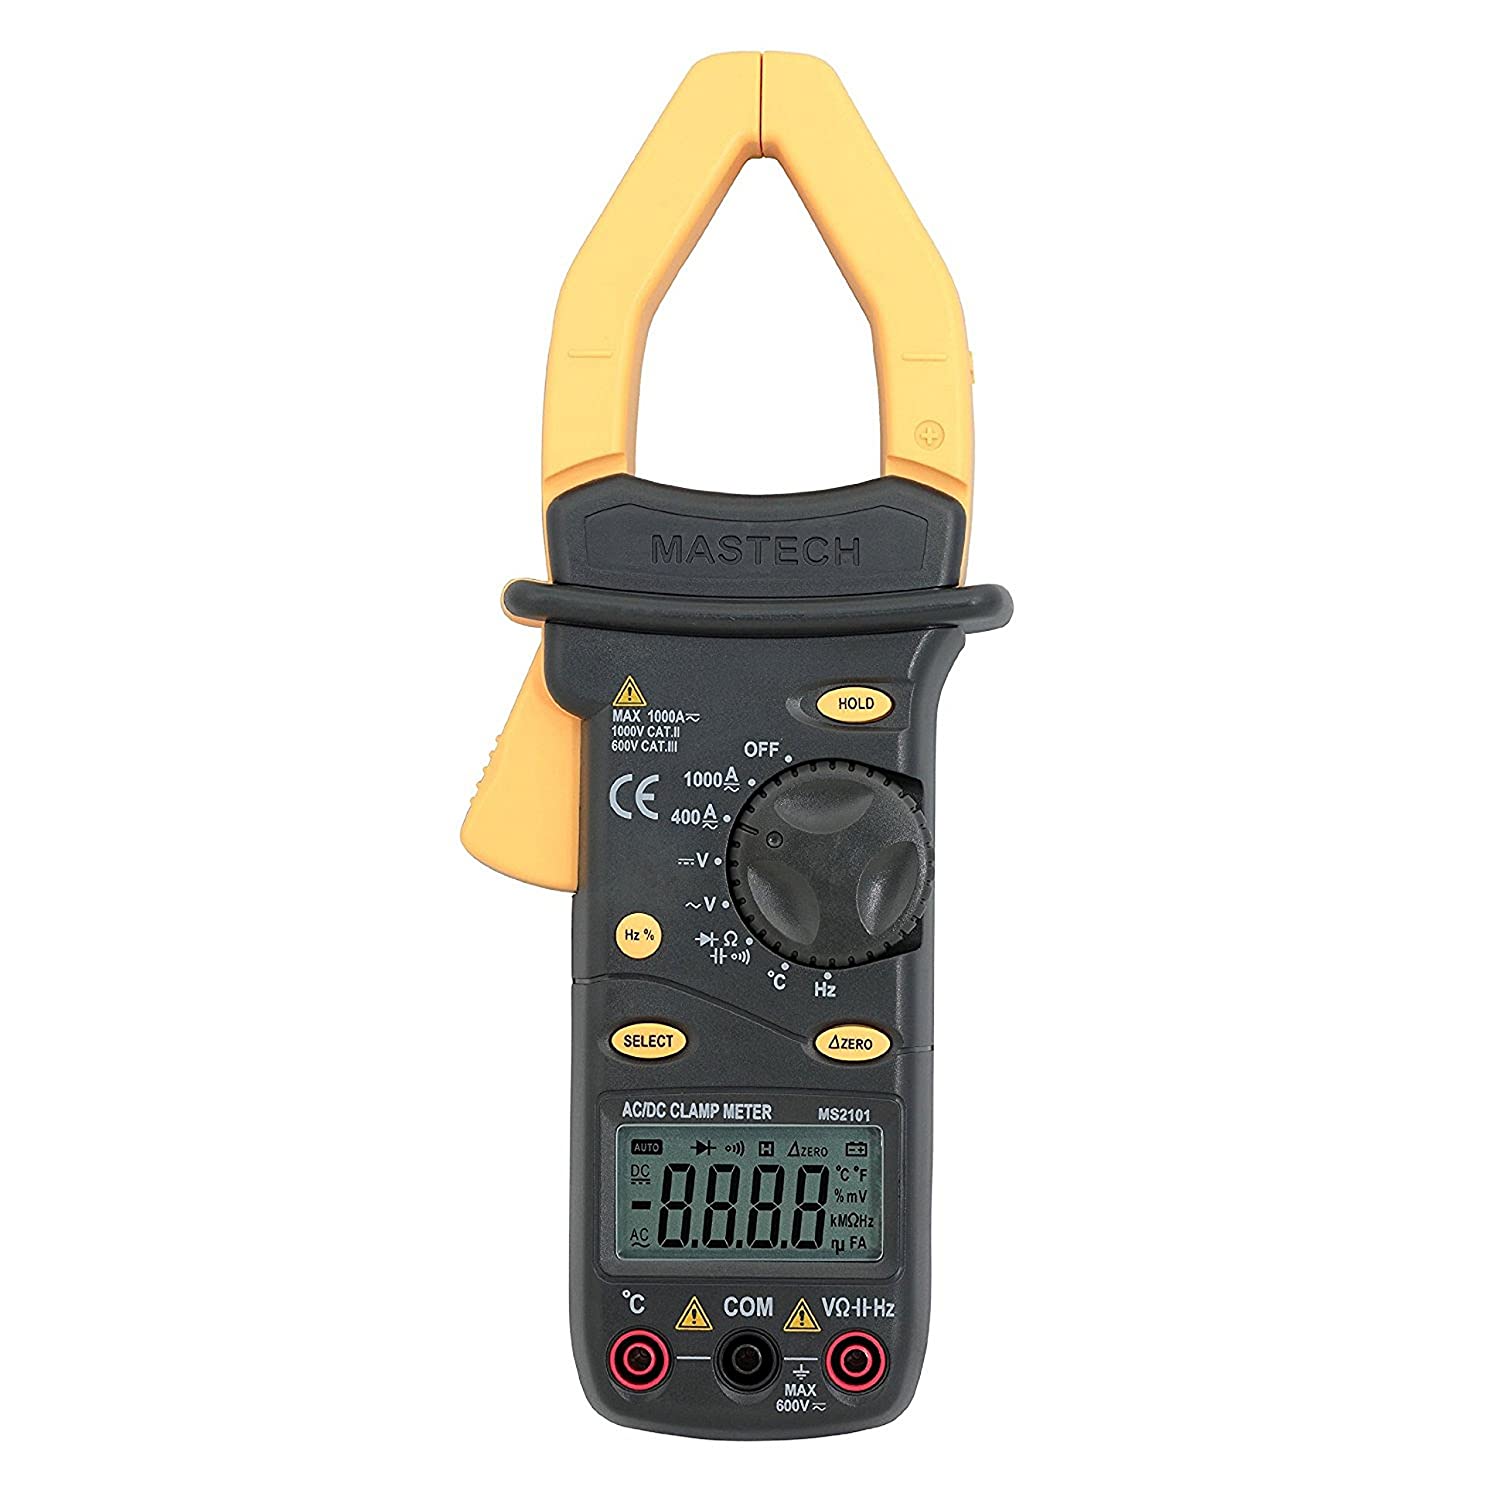 Mastech MS2001C Digital AC Clamp Meter AC DC Voltage - AC Amps - Frequency